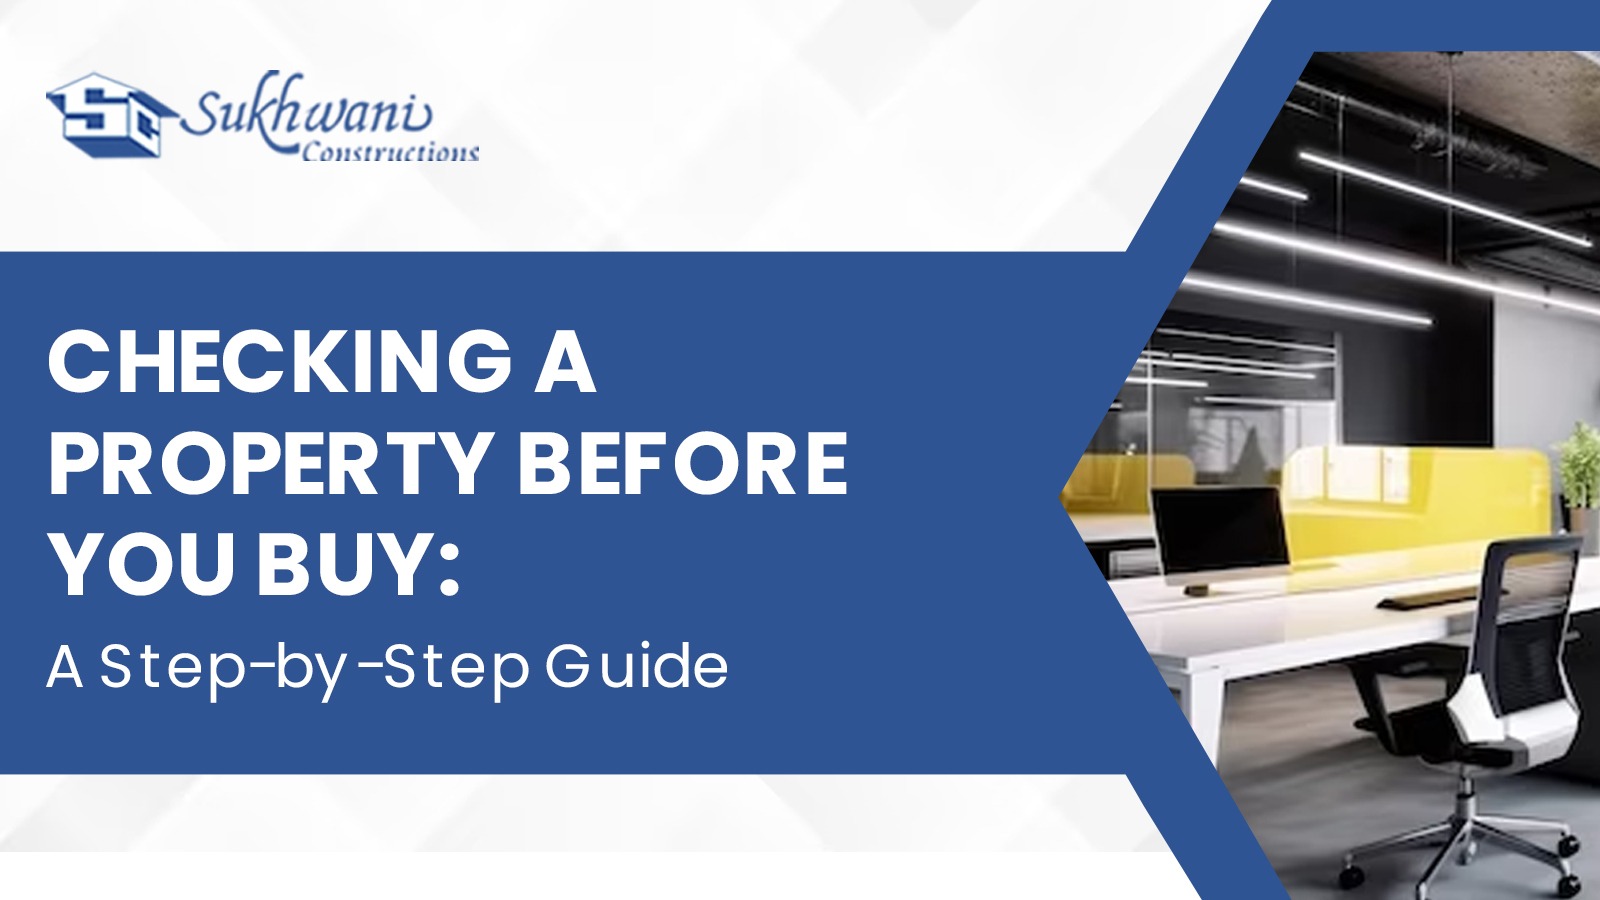 Checking a Property Before You Buy A Step-by-Step Guide